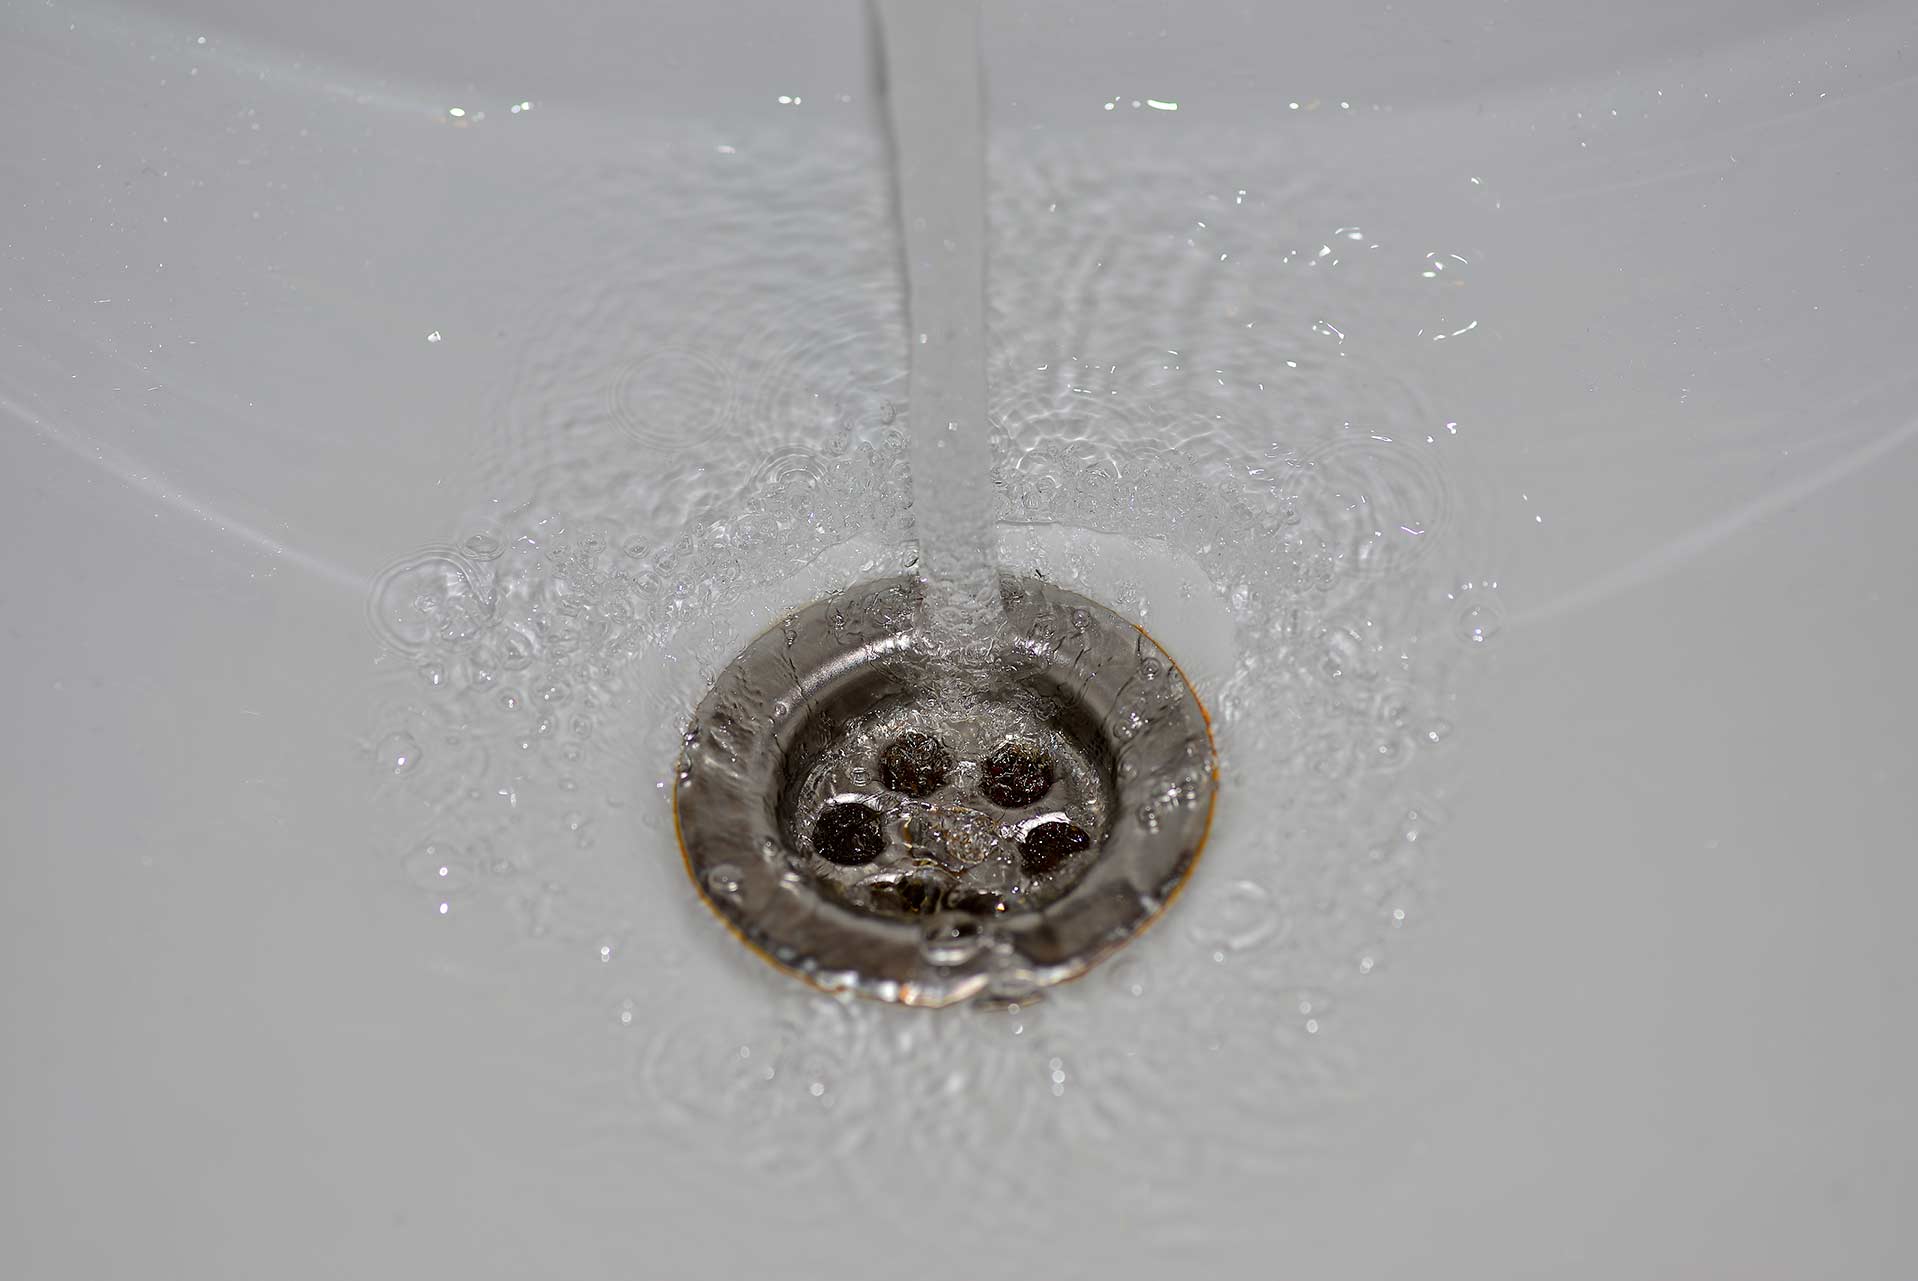 A2B Drains provides services to unblock blocked sinks and drains for properties in Newbury.